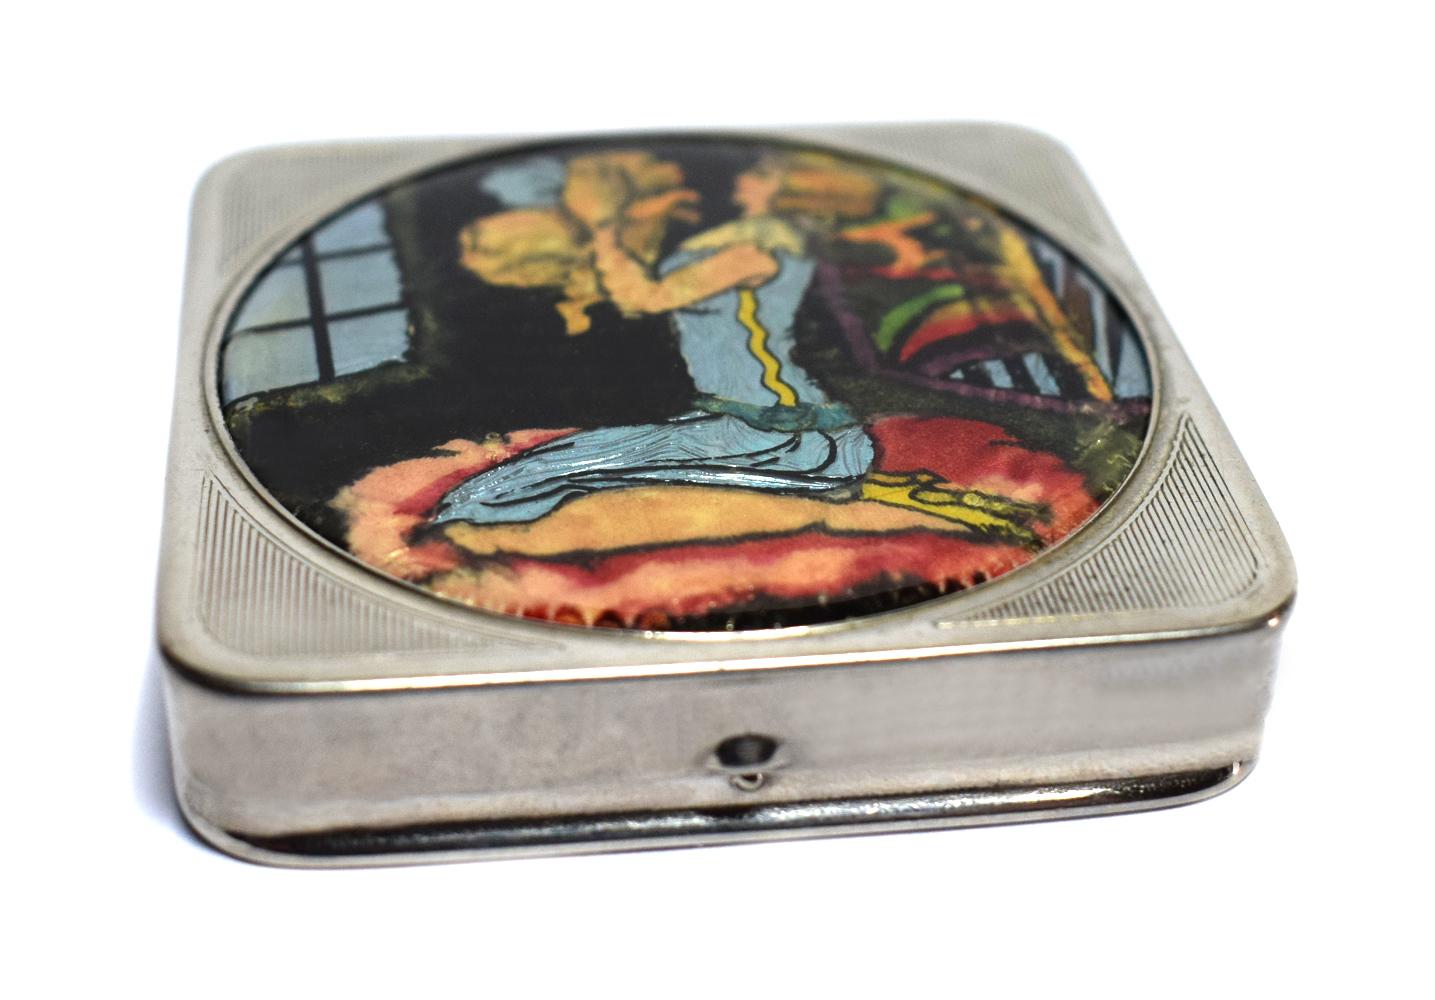 A delightful ladies Art Deco compact marked to the interior with the trade name Stratnoid made in England with the registration design number for 1931. The base is engine turned with the top lid depicting a wonderful scene of a young flapper girl